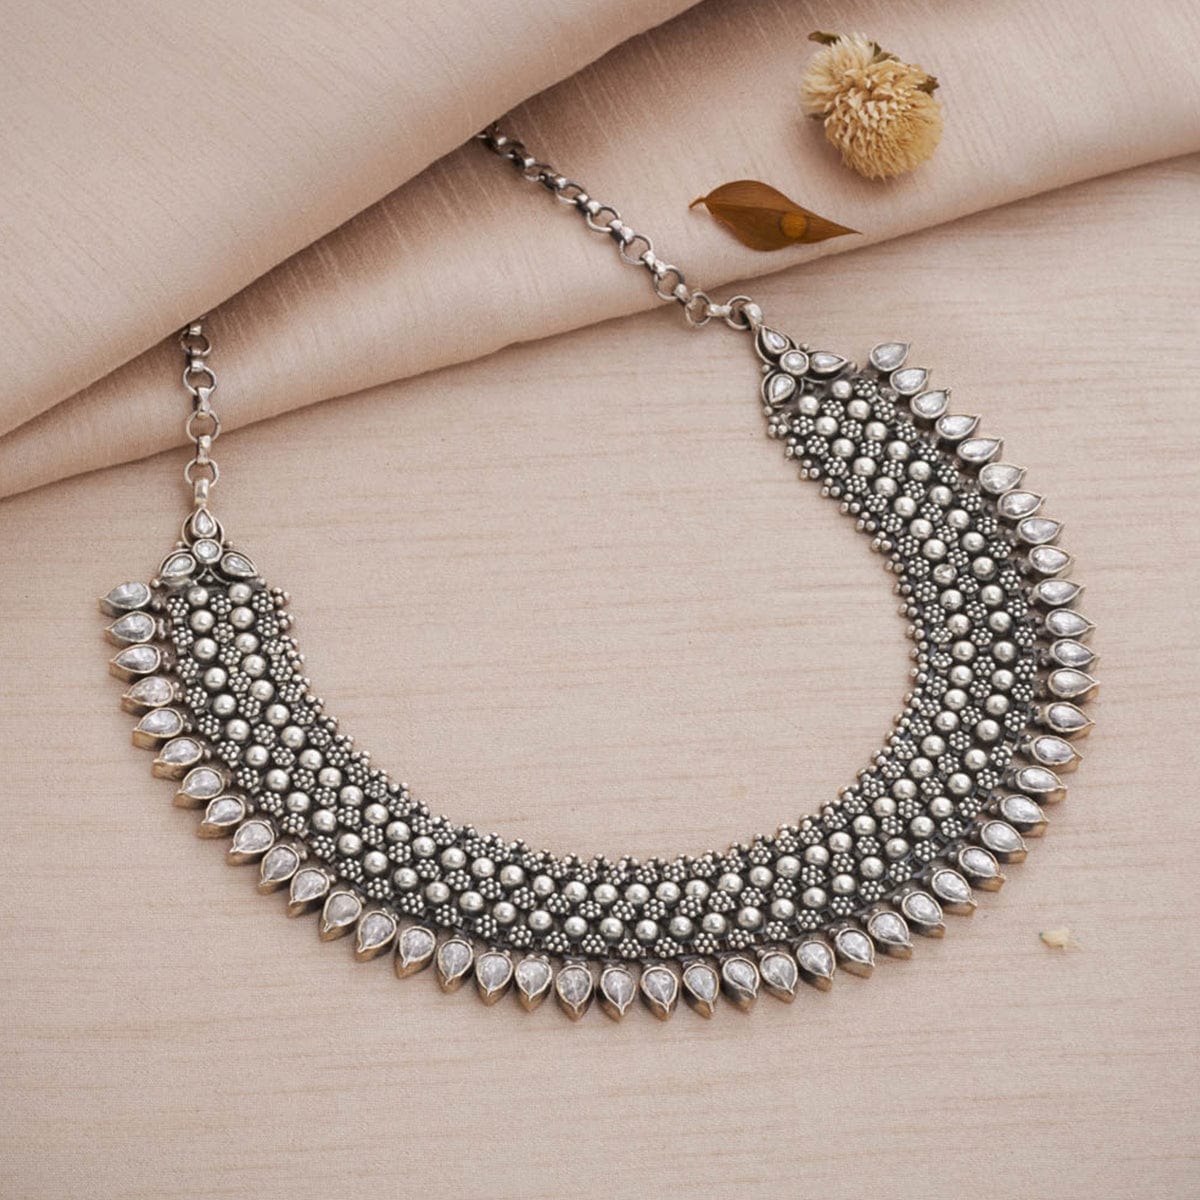 Necklace oxidised silver choker for women fashion traditional Indian  jewelry tribal inspired antique silver Choker Metal jewellery - Walmart.com